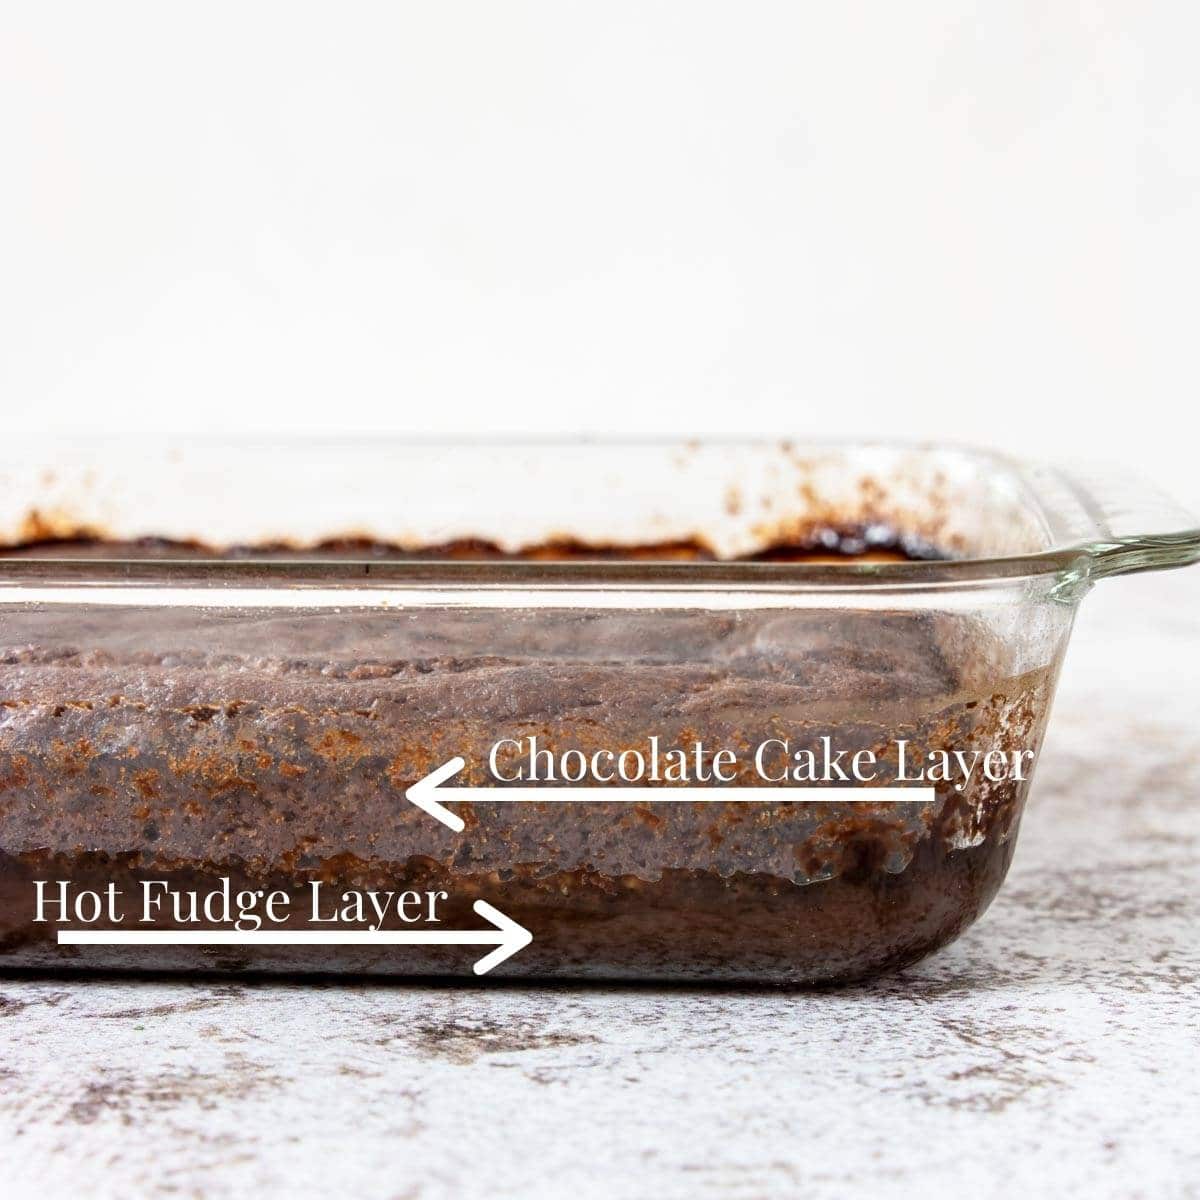 showing the layers of pudding cake - hot fudge on bottom and cake on top